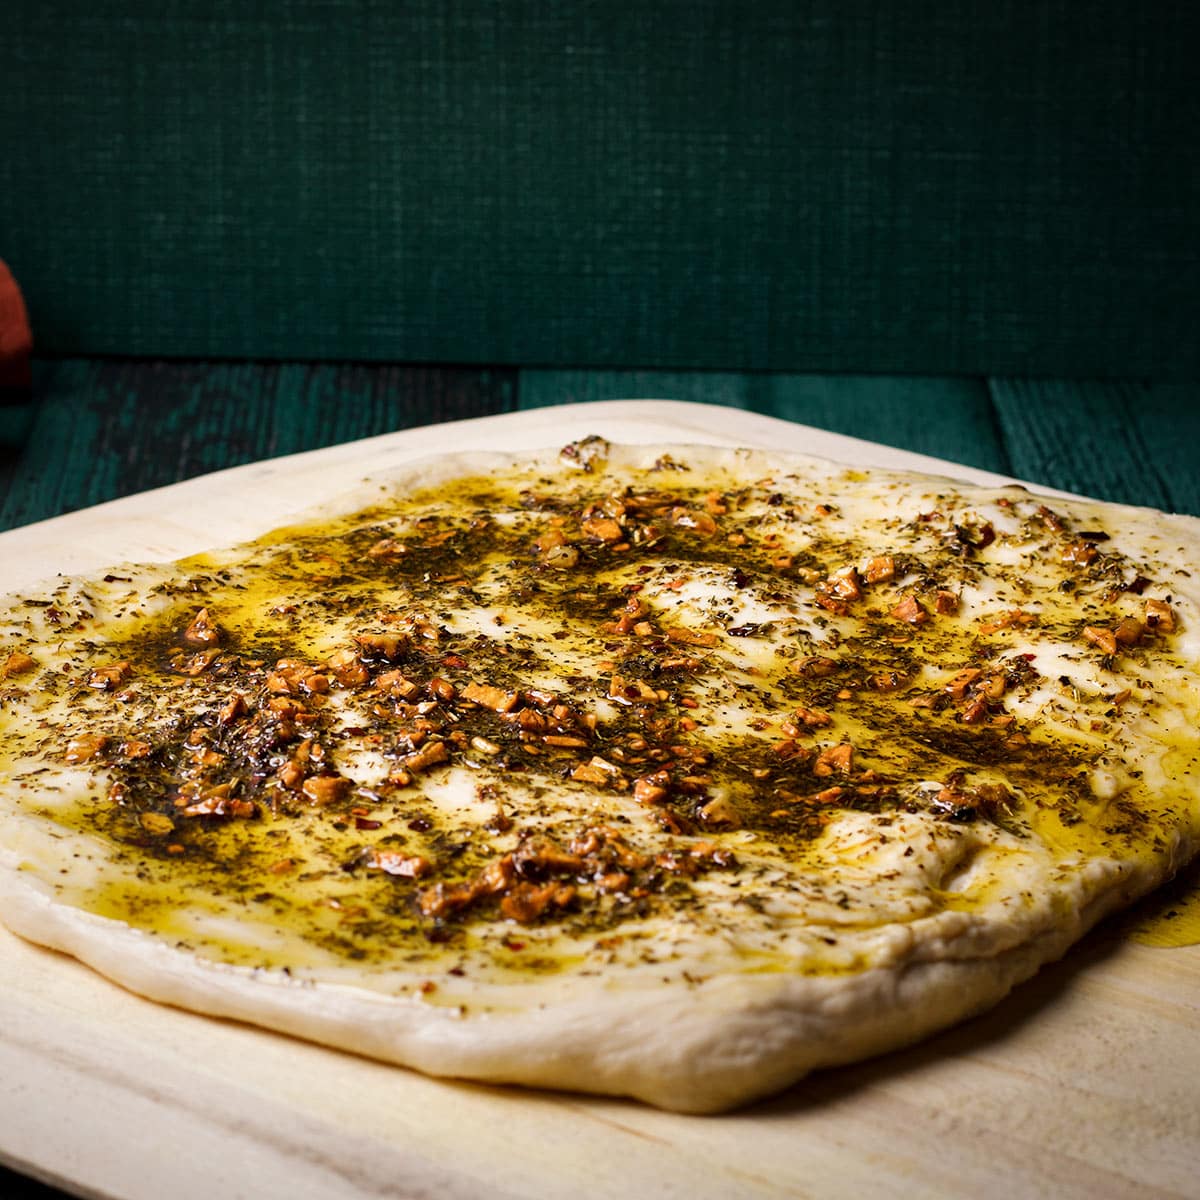 Pizza dough that's been covered in garlic herb oil.